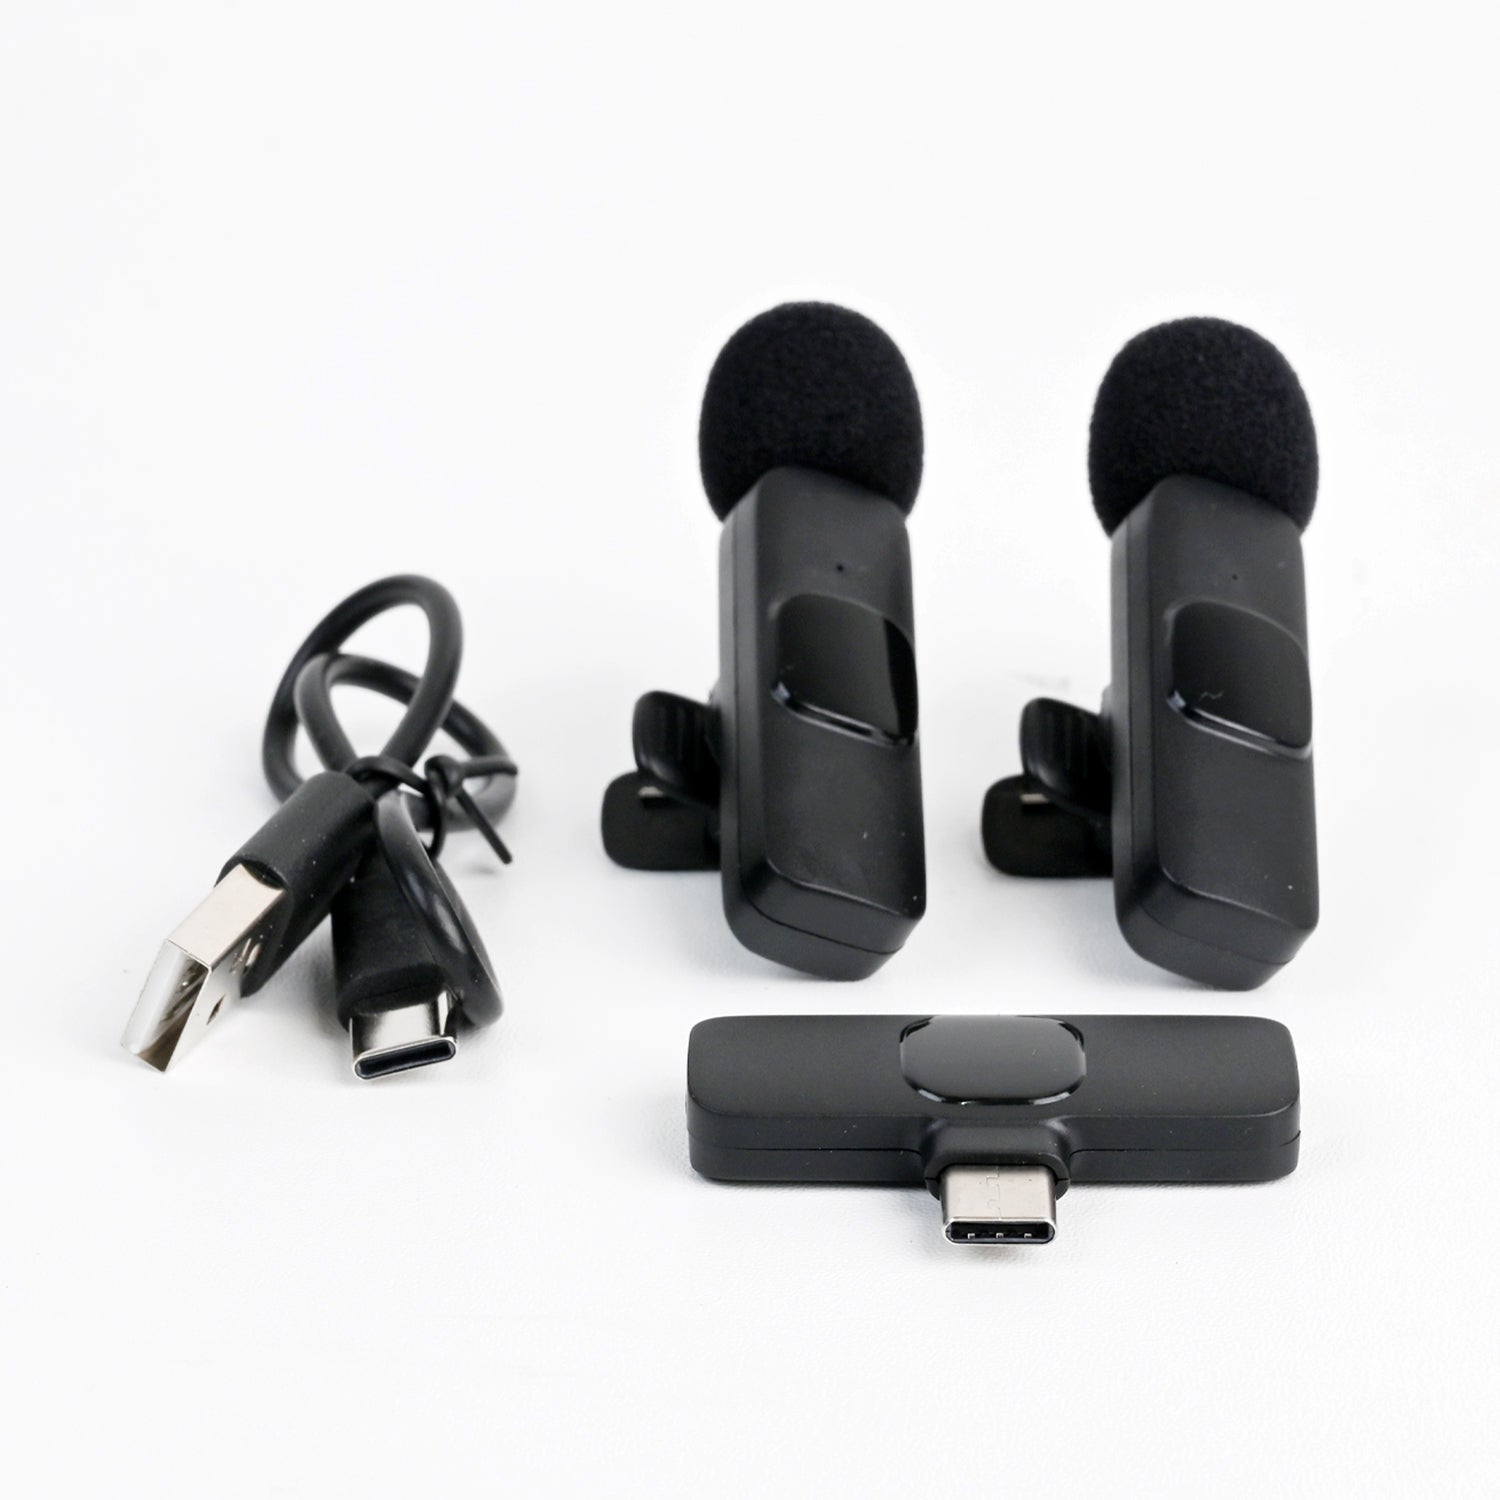 K9 Wireless Lavalier Microphone Type C with 2 Microphones